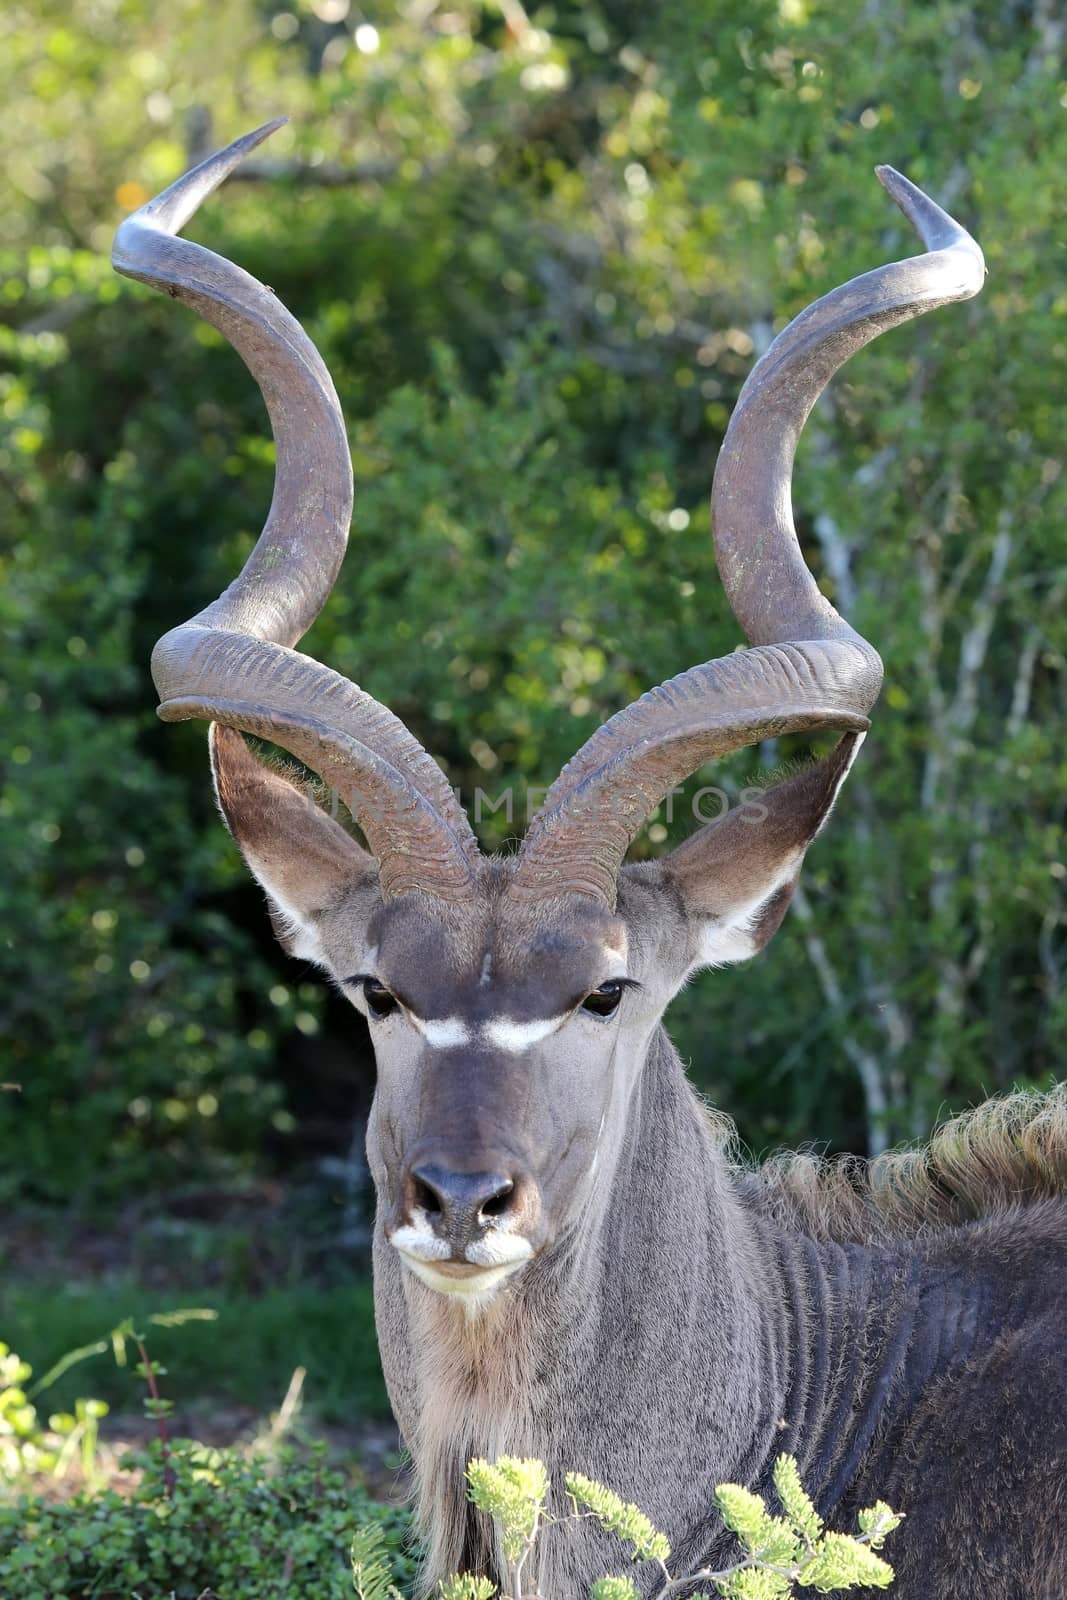 Kudu antelope with large spiralled horns in the African bush